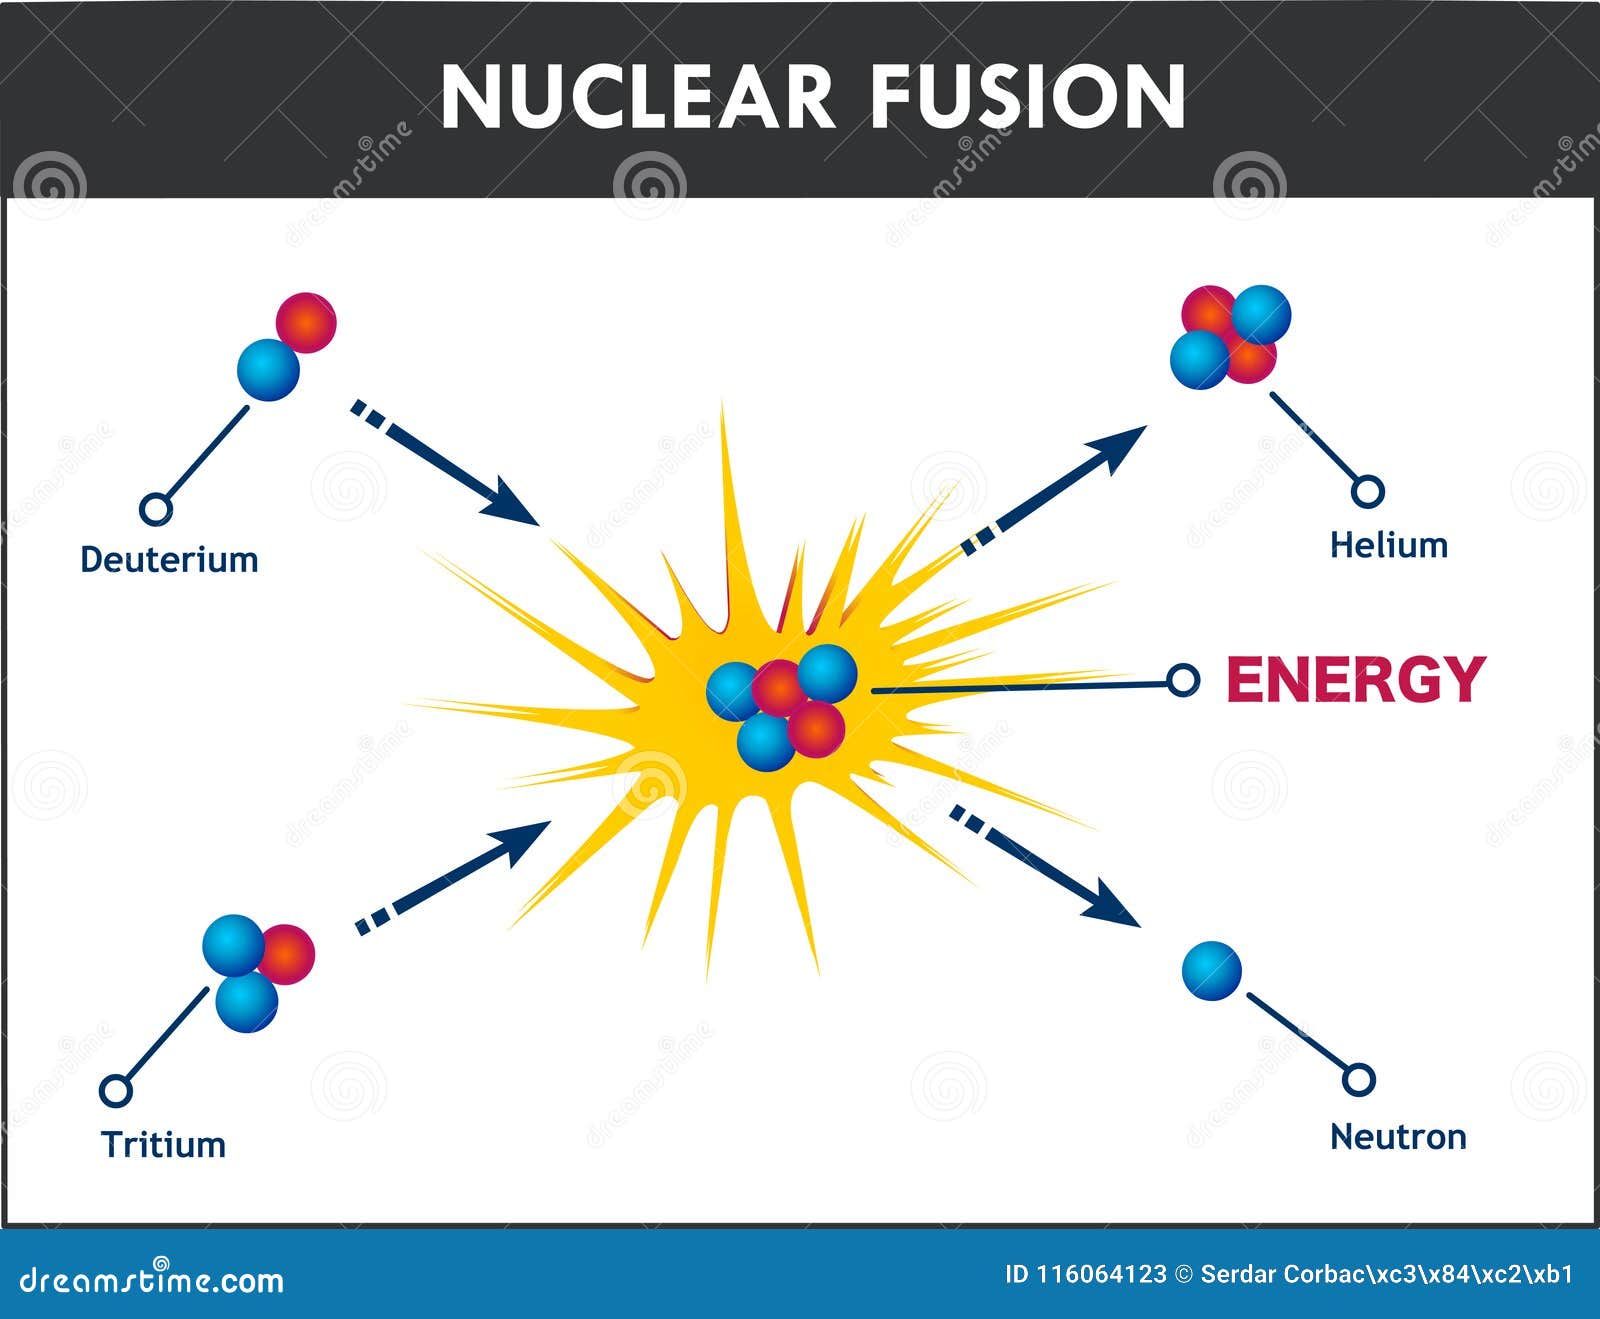   of a nuclear fusion